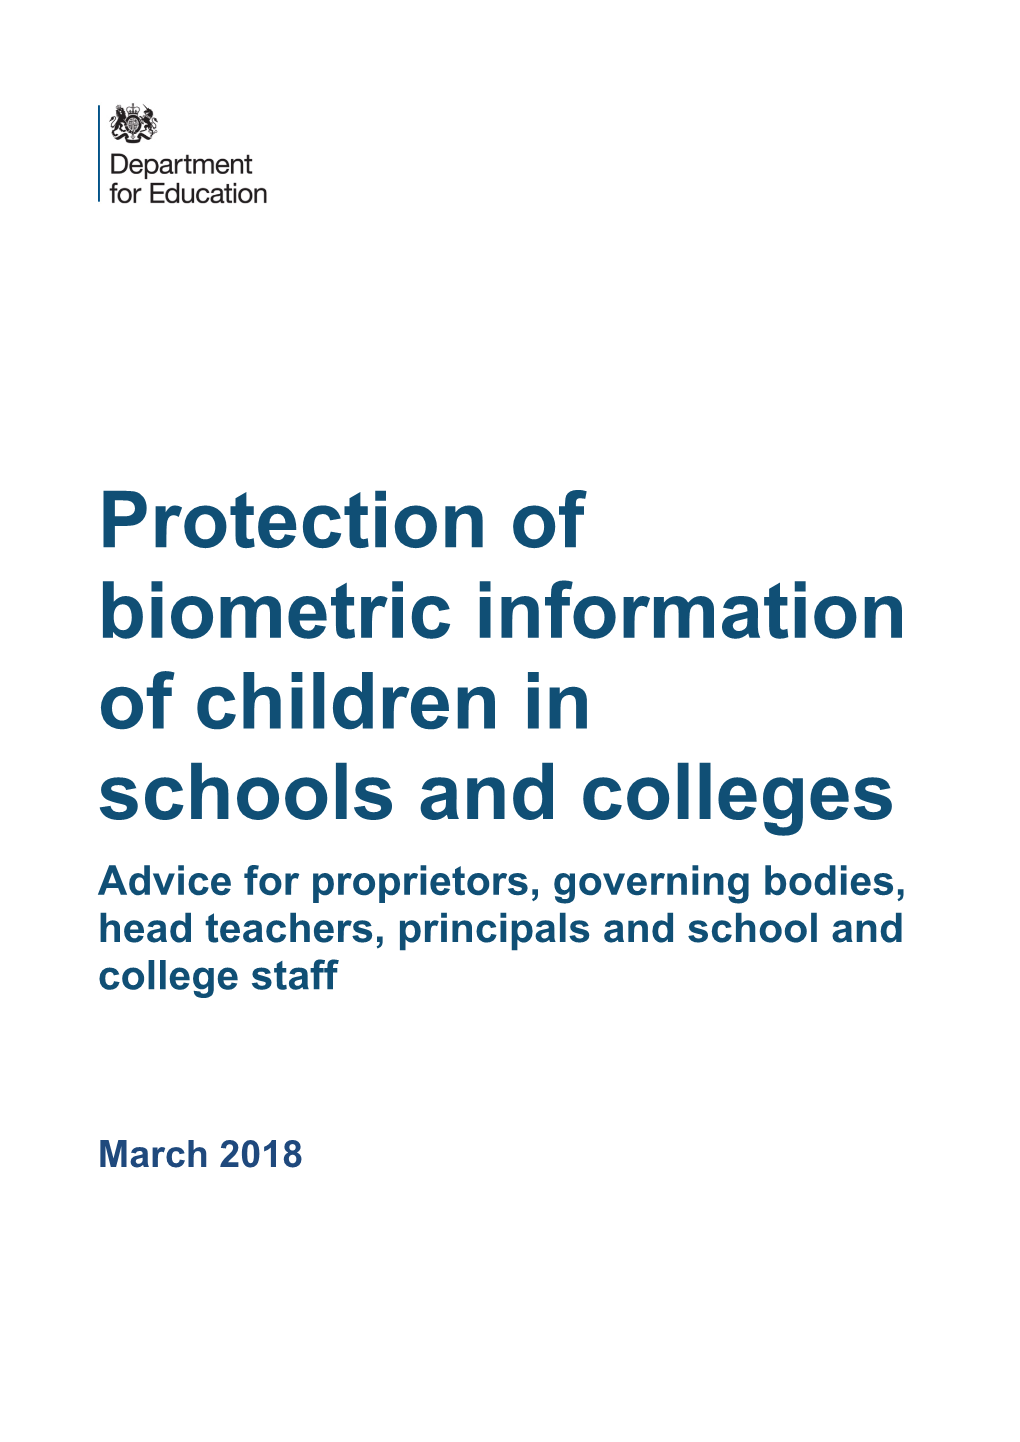 Protection of Biometric Information of Children in Schools and Colleges